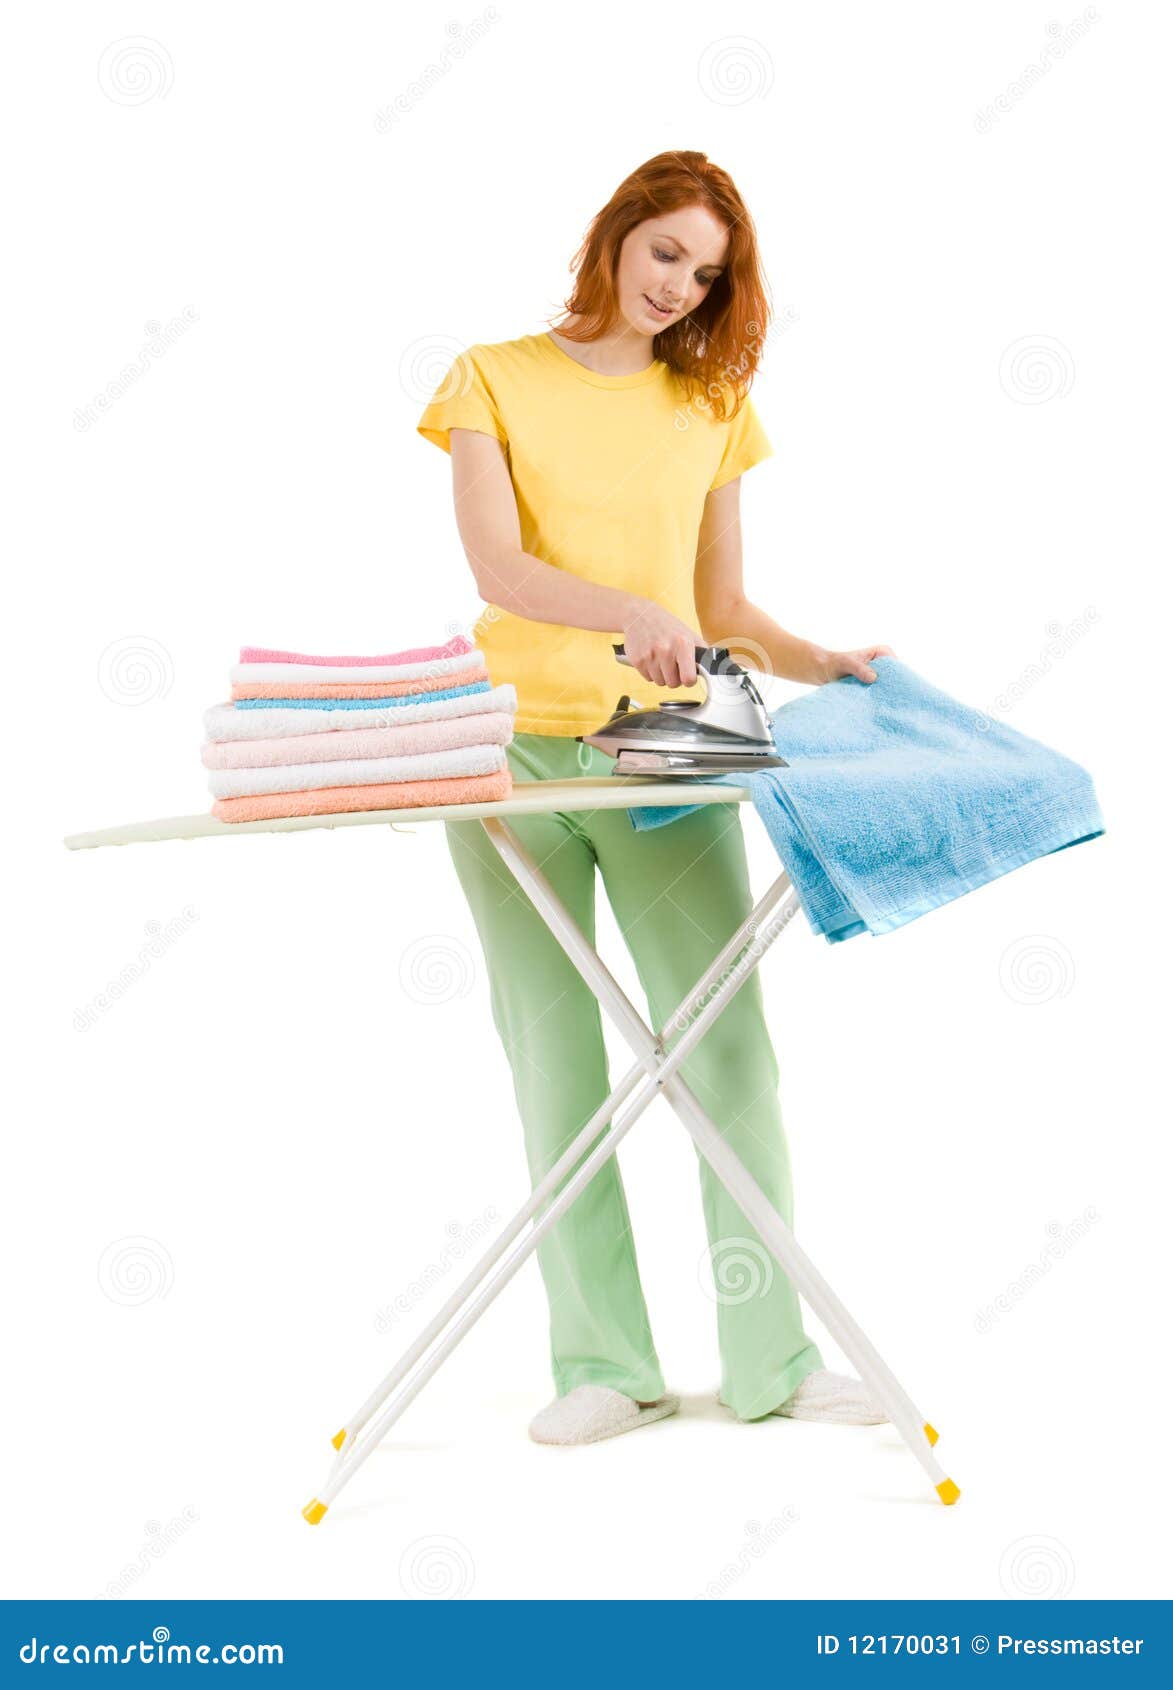 16,435 Woman Ironing Cloth On Board Images, Stock Photos, 3D